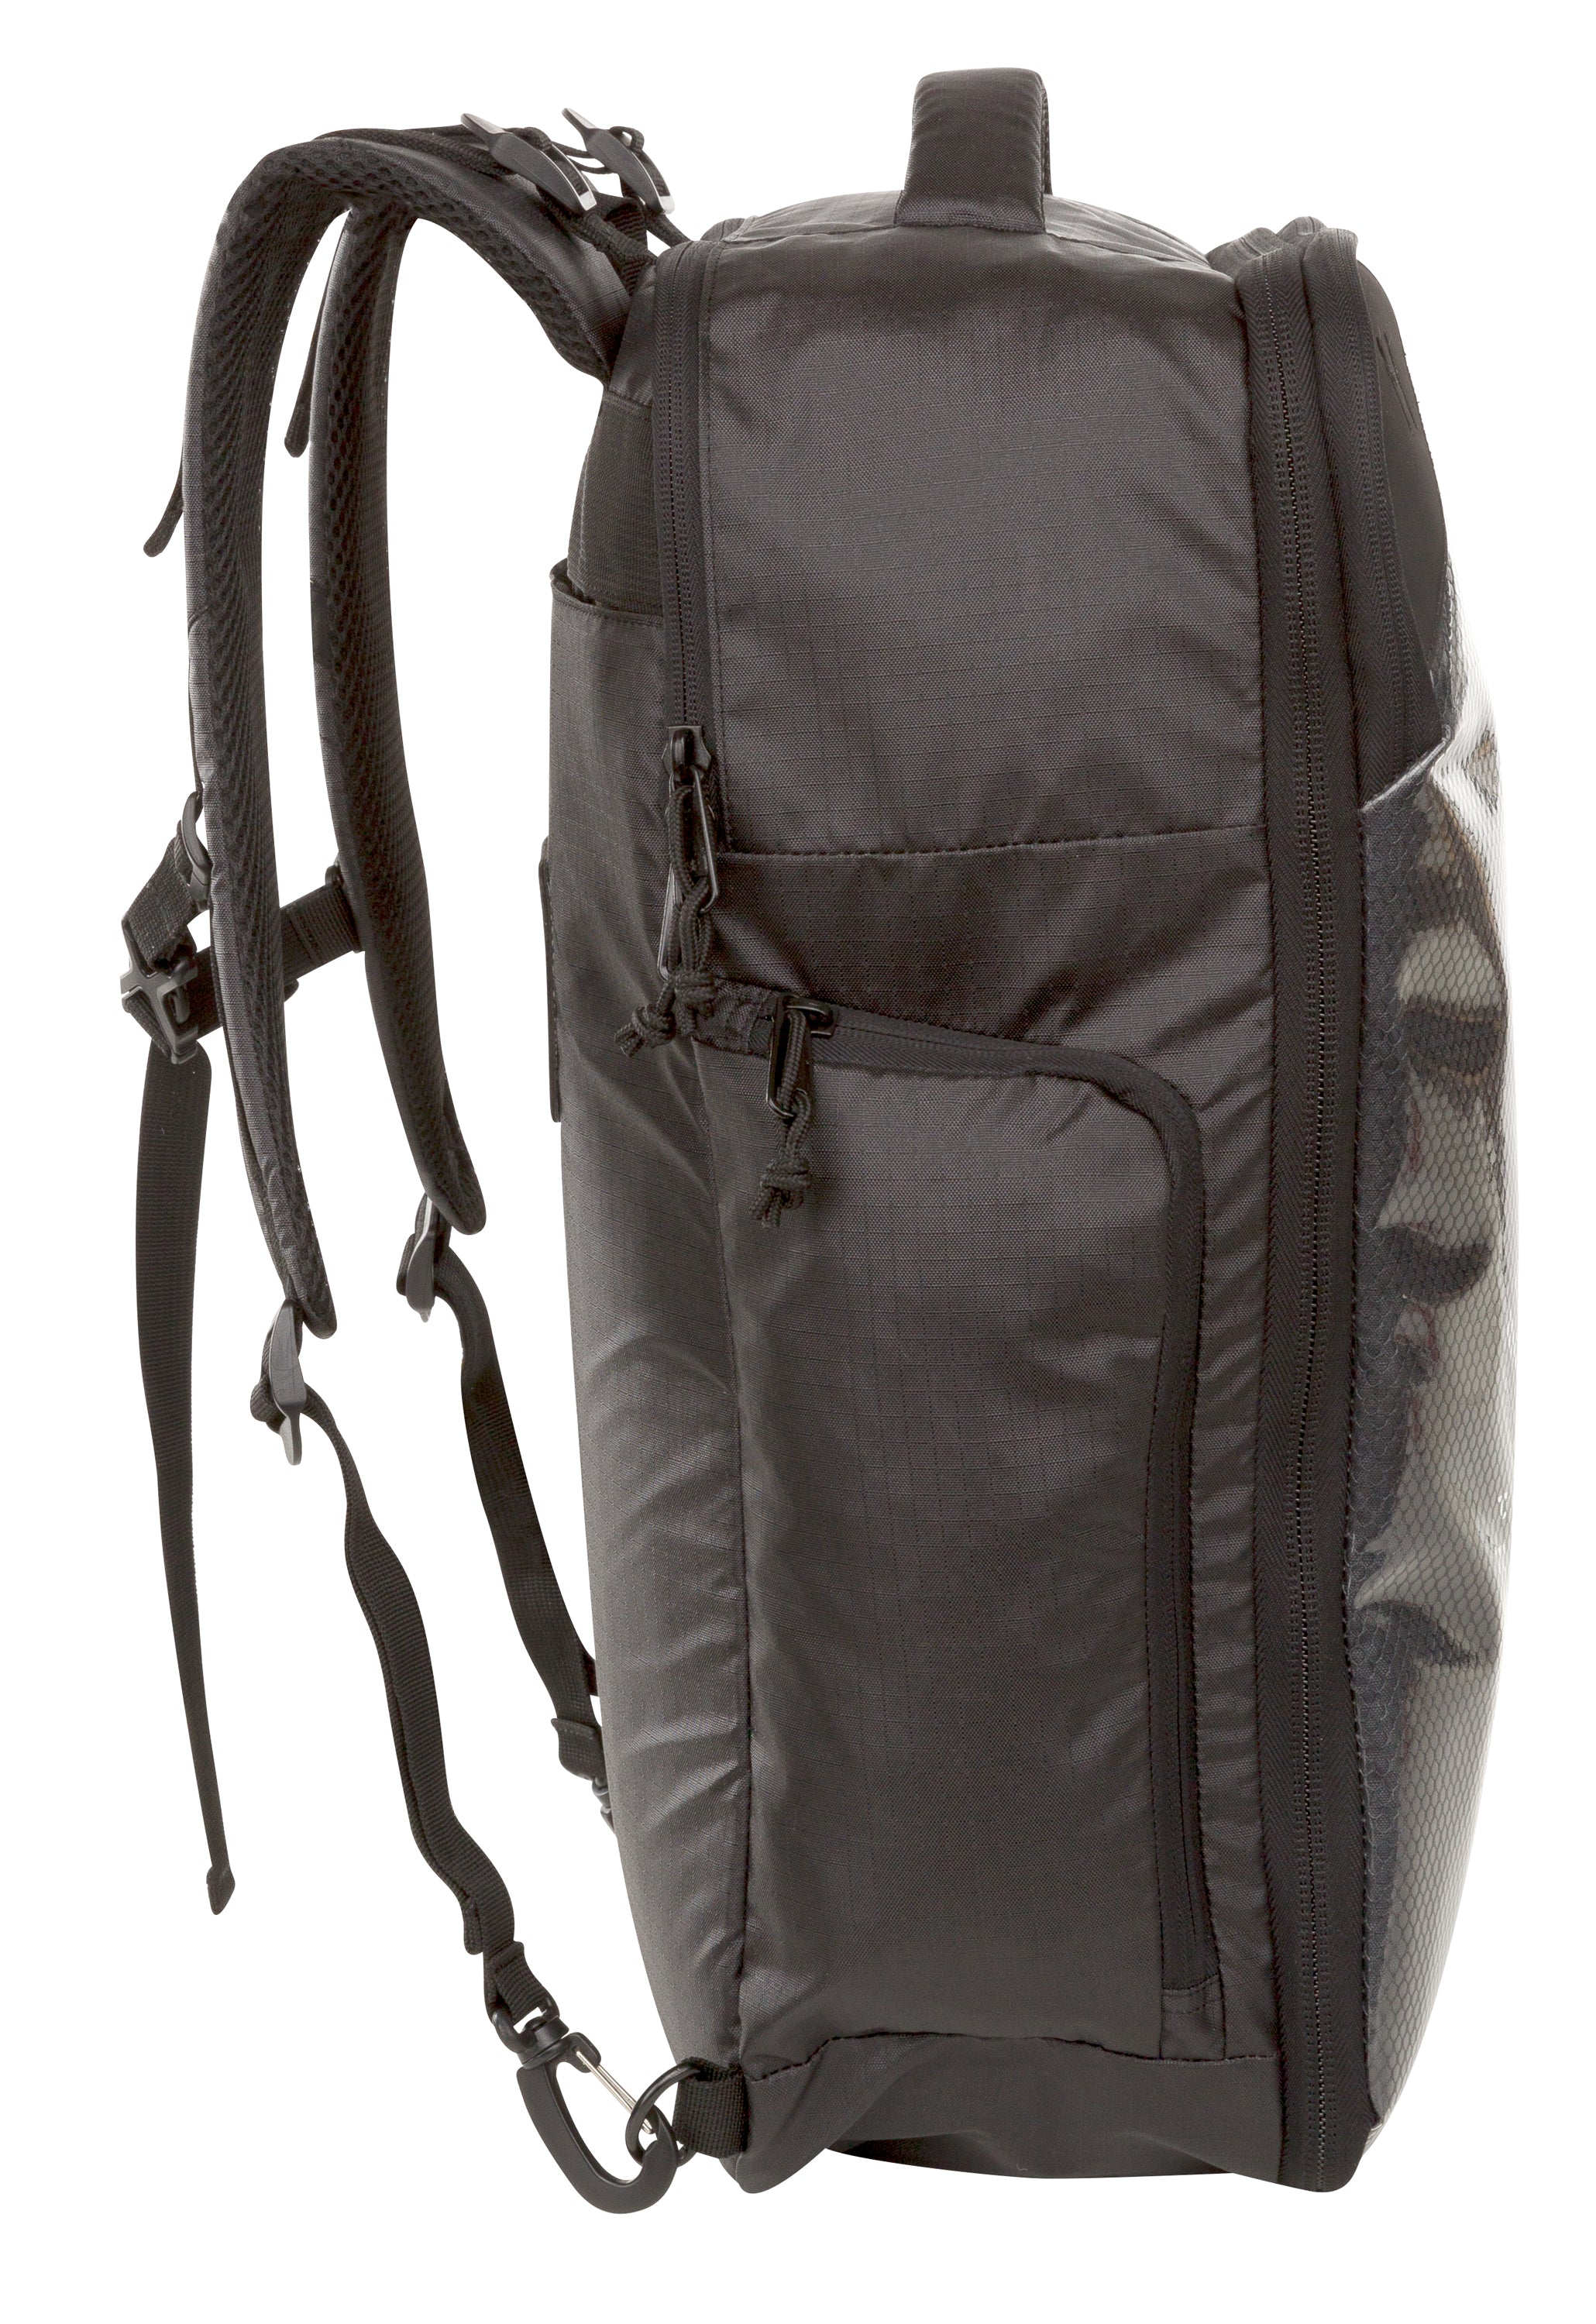 Outdoor Products Venture 17 Ltr Hiking Backpack, Black, Unisex, Adult, Teen  